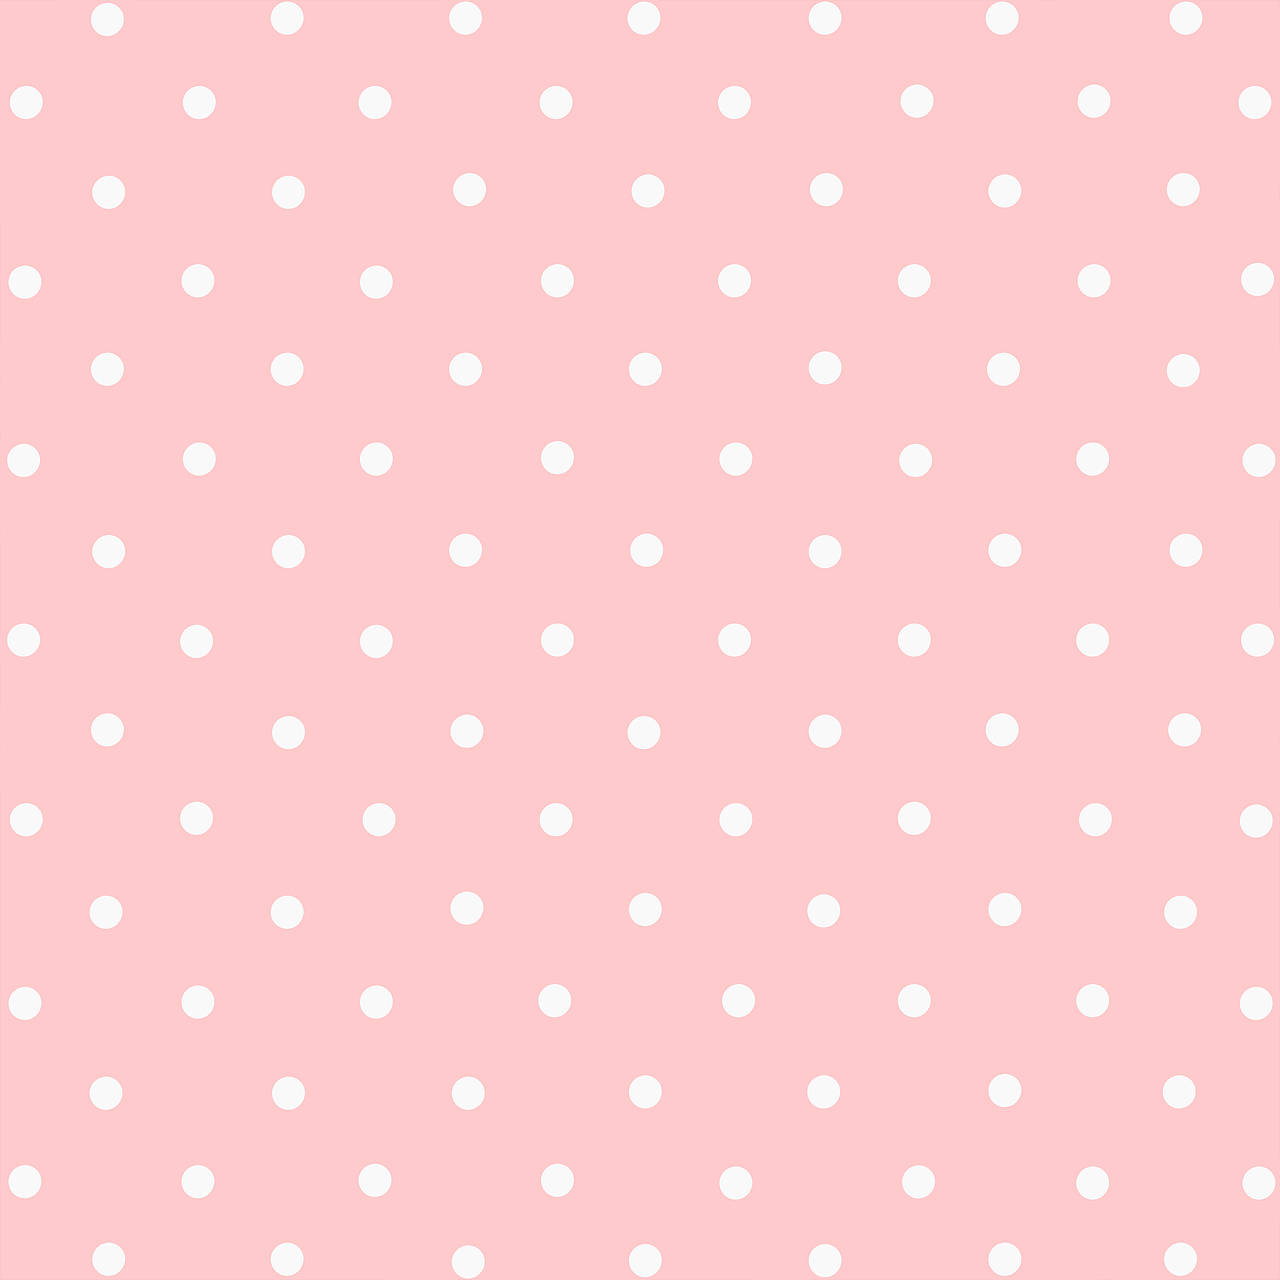 Light Pink And White Polka Dots